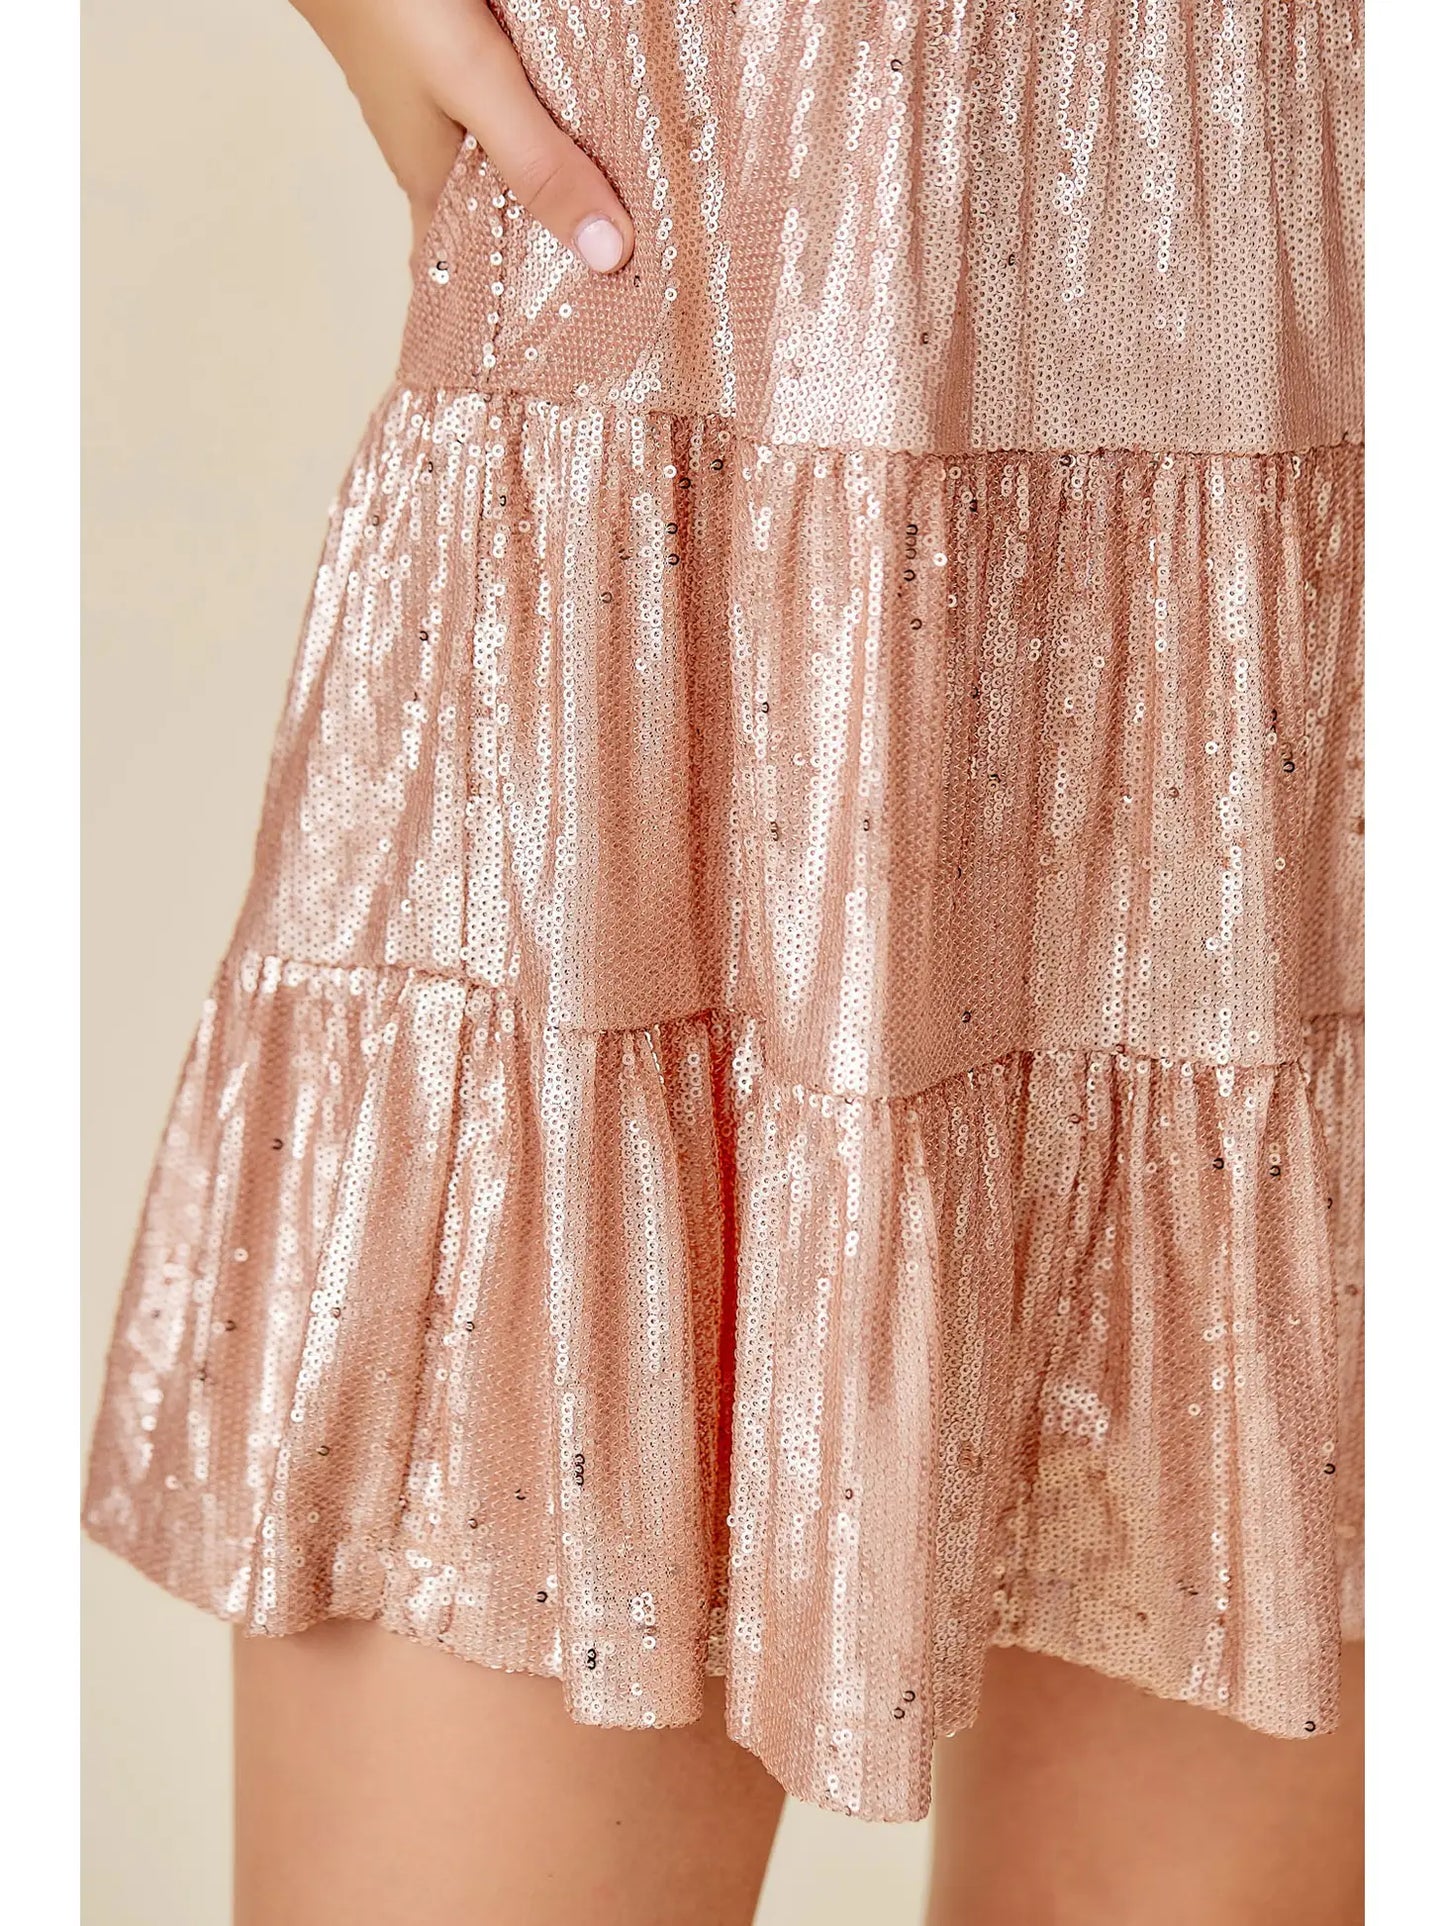 MS Blush Sequin Tiered Flare Dress